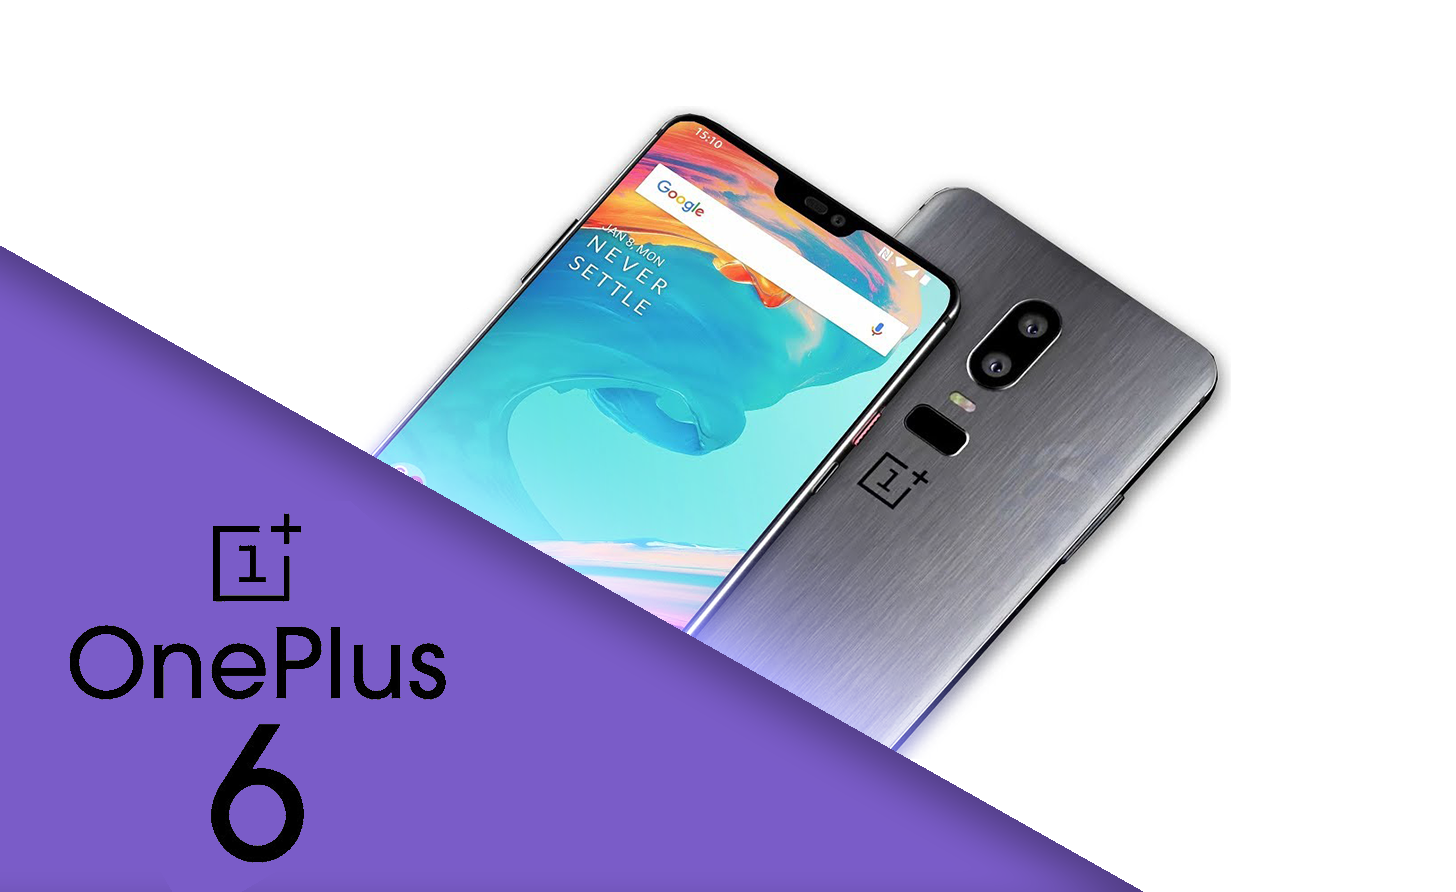 Pros and cons of the OnePlus 6 smartphone